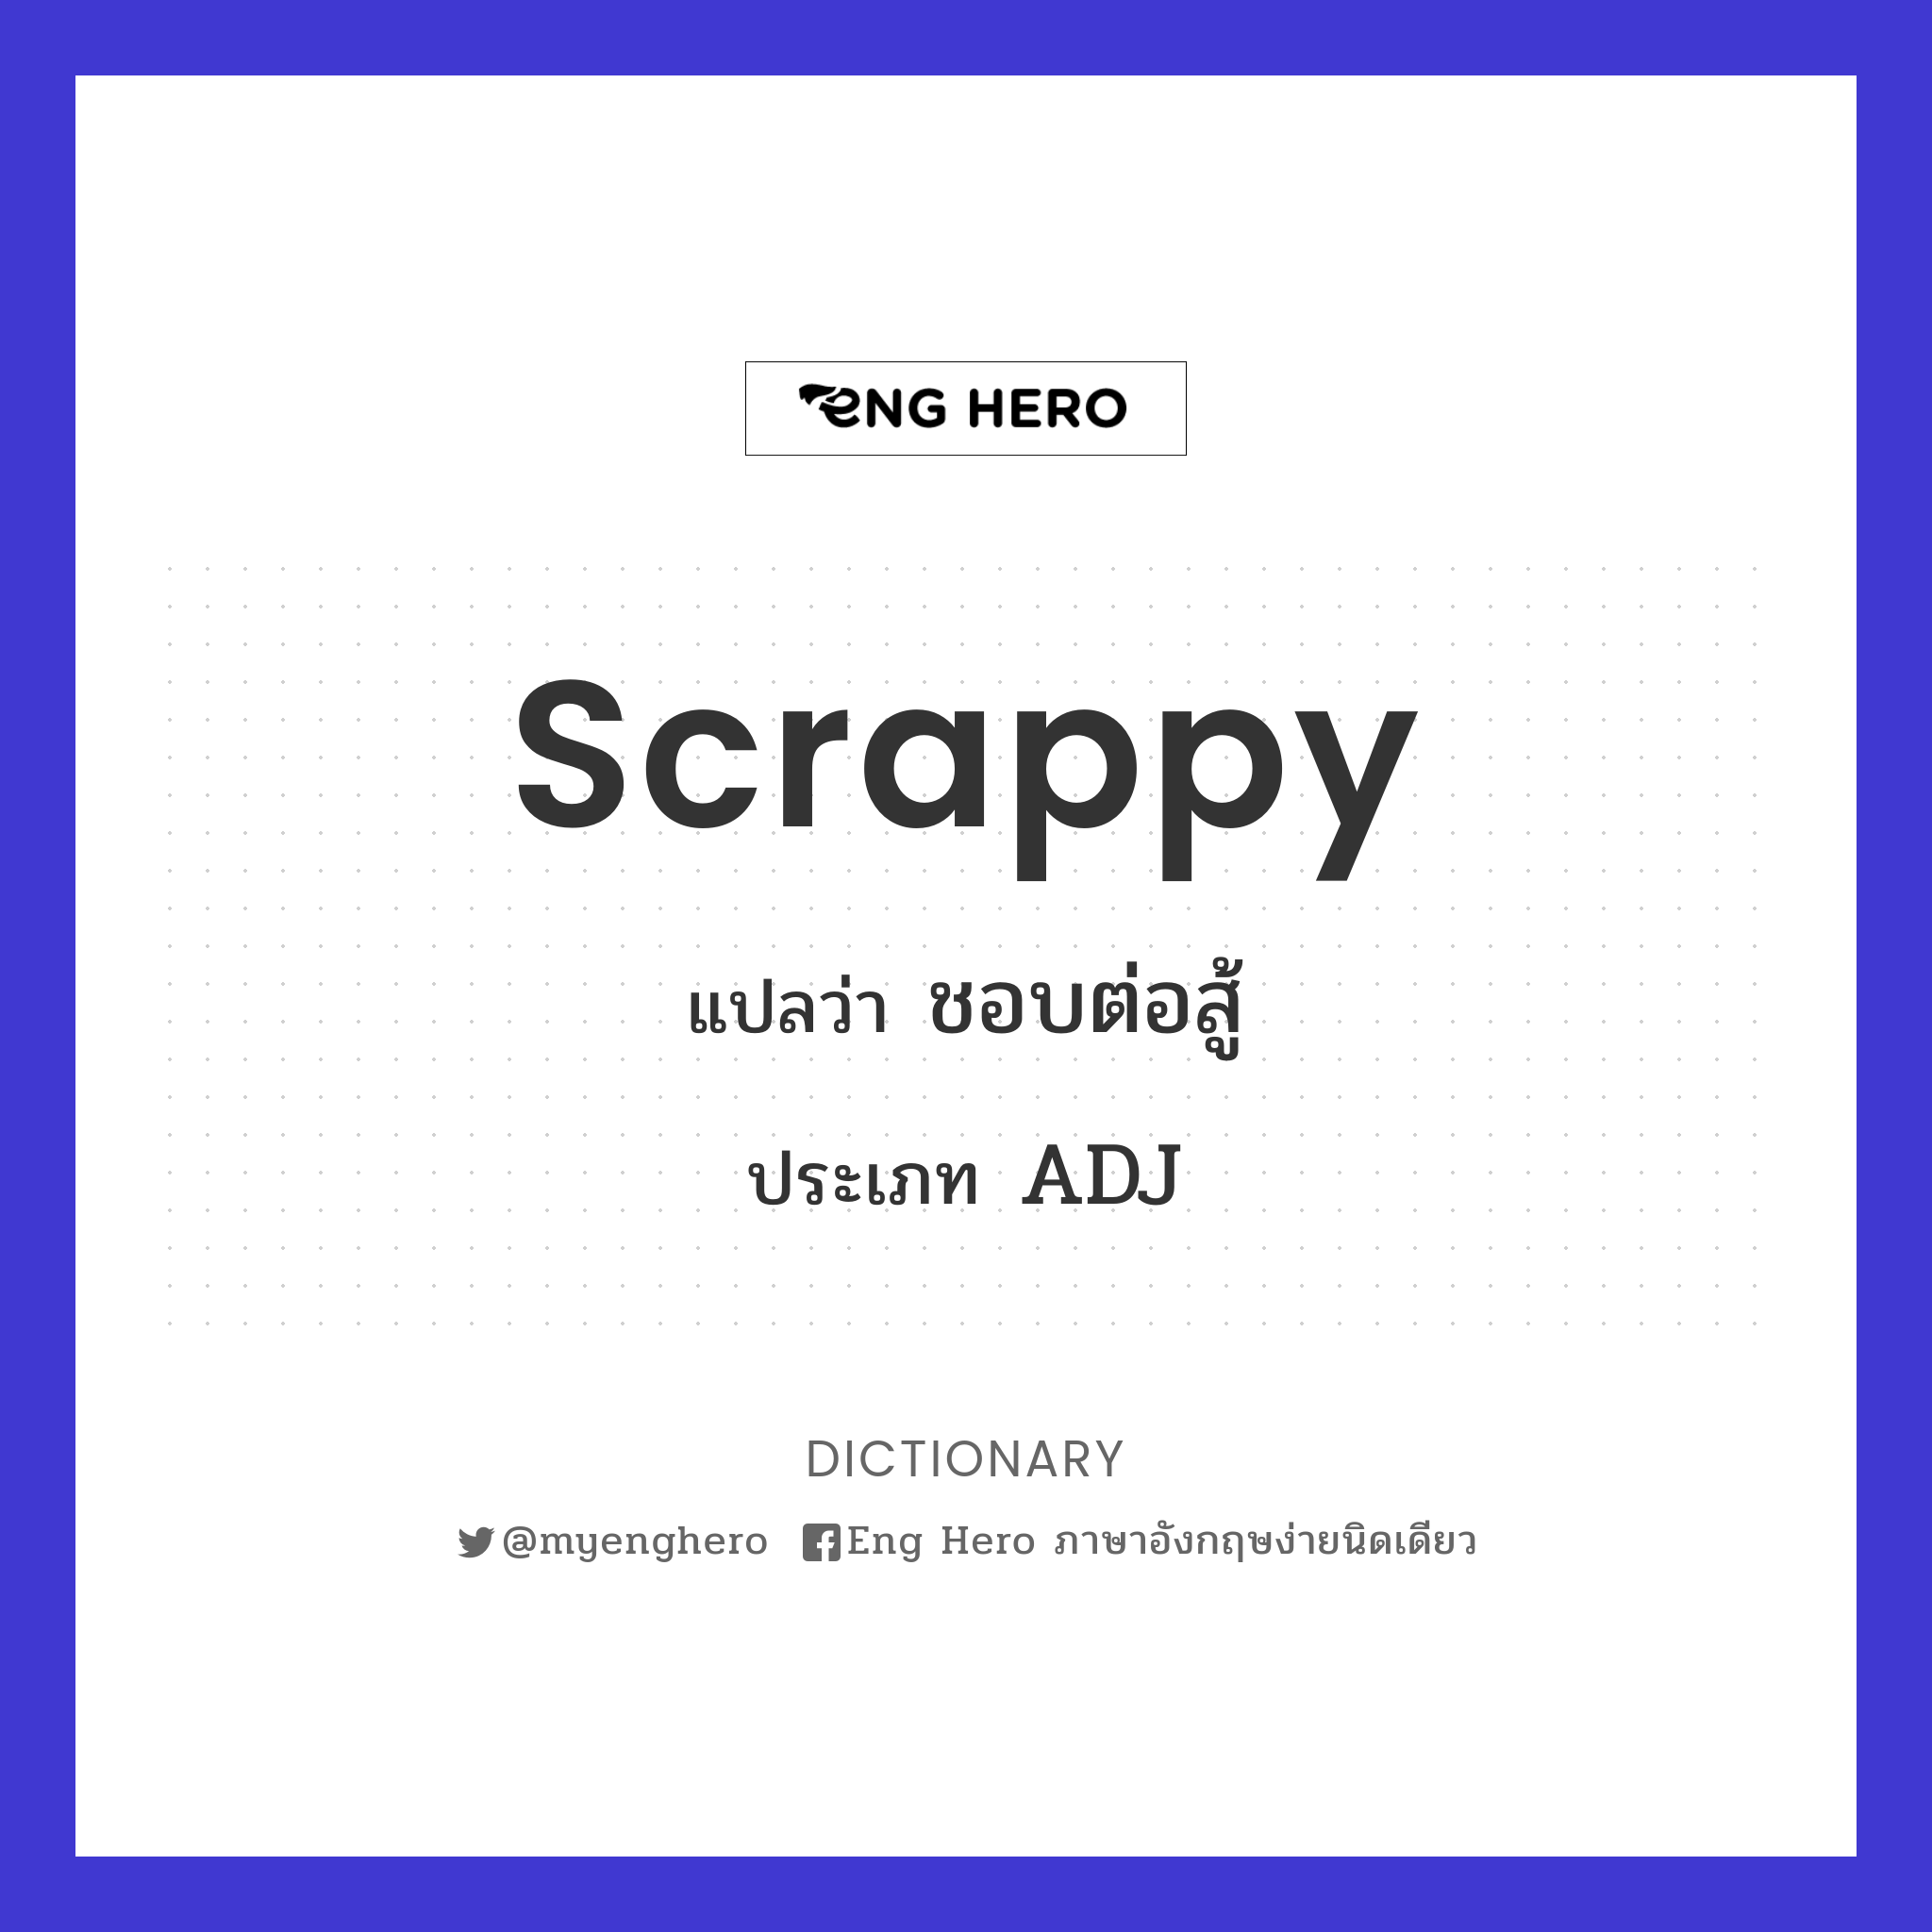 scrappy